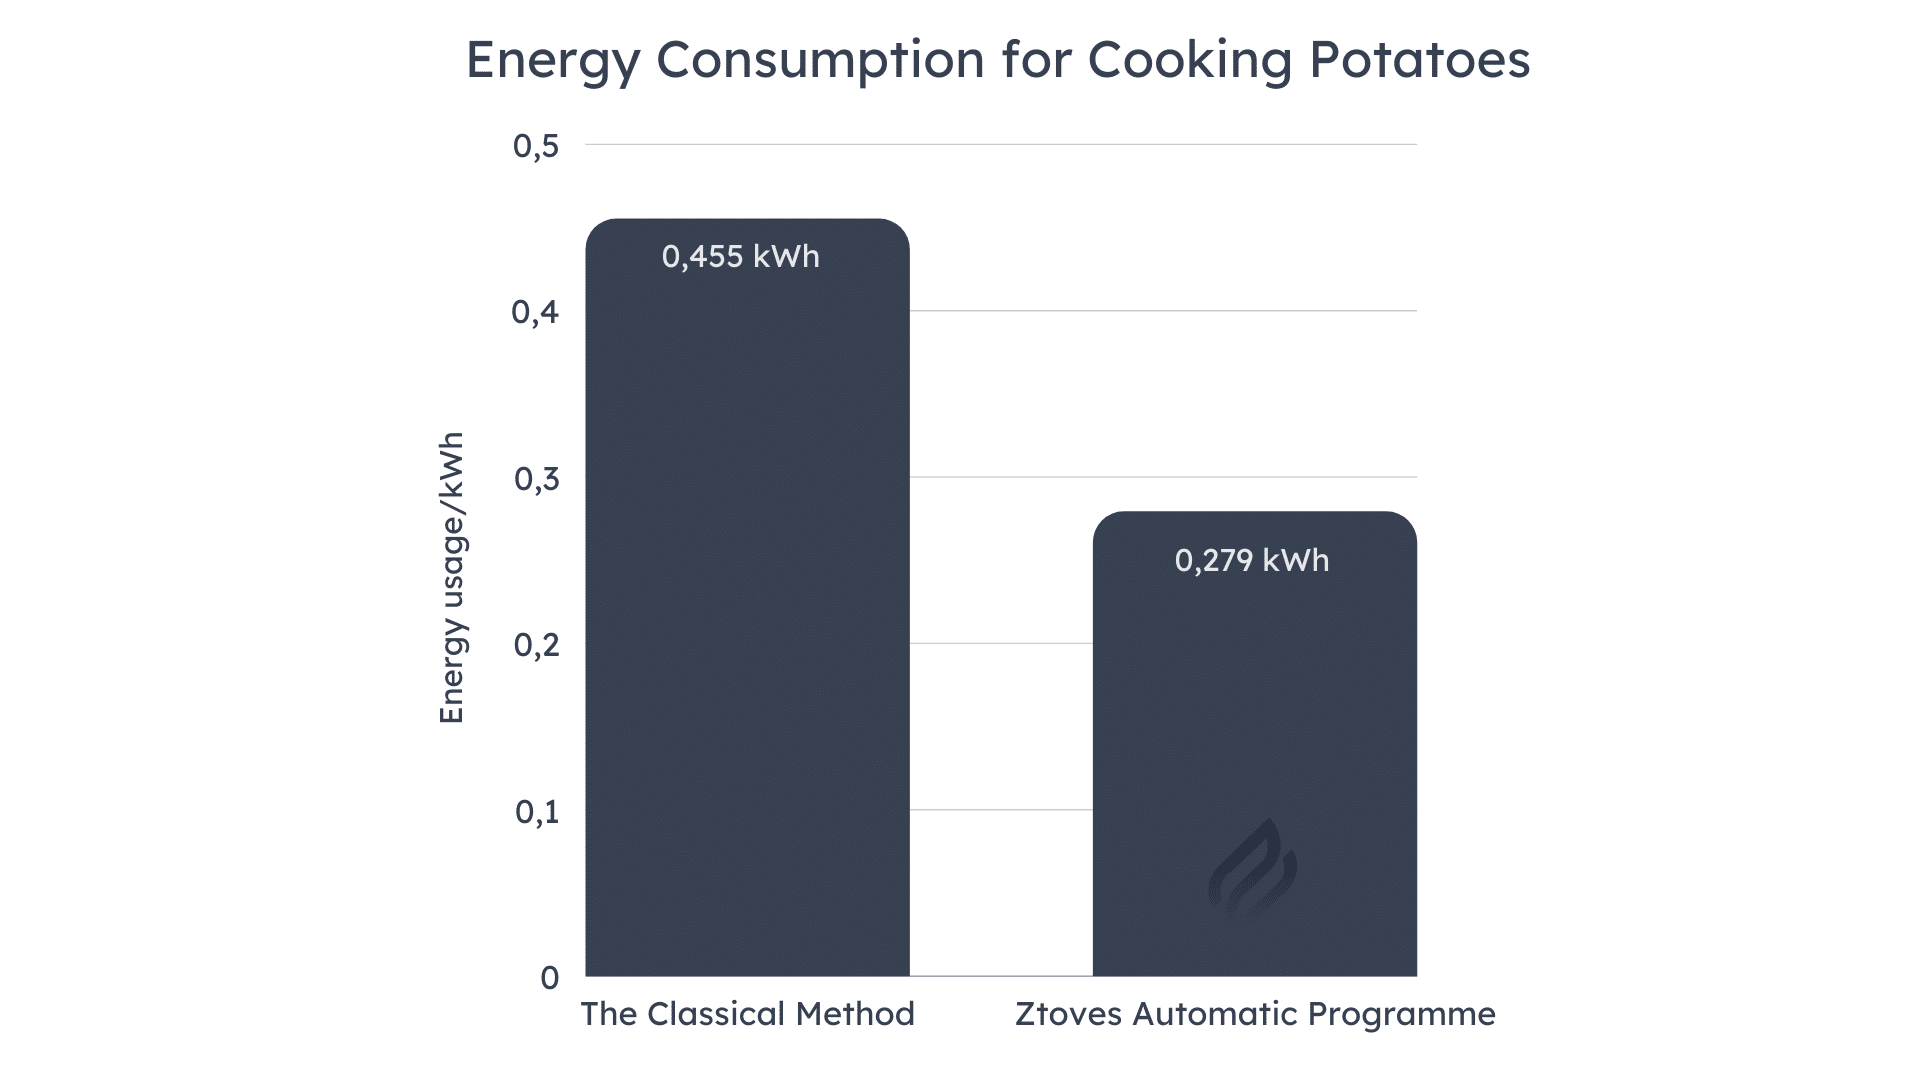 The graph shows that with the classic method of boiling potatoes you use 0.455 kWh, compared to Ztove's automatic programme where you use 0.279 kWh